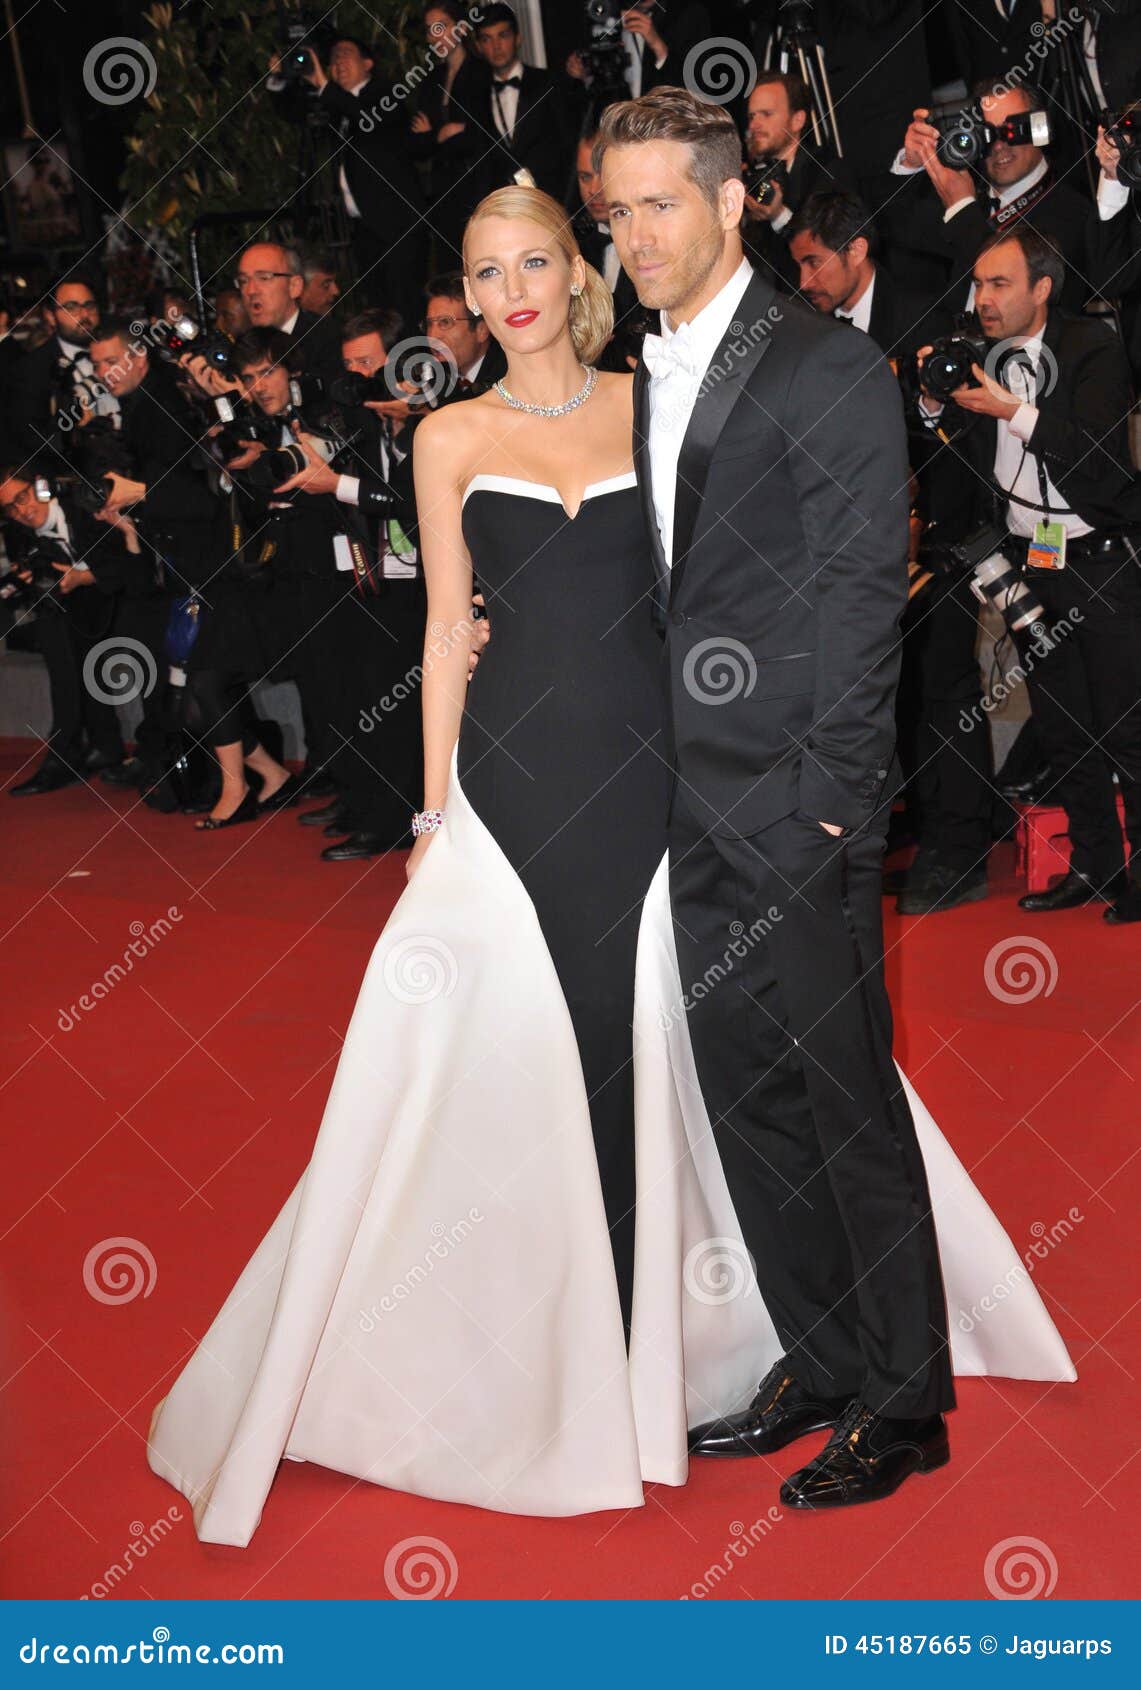 https://thumbs.dreamstime.com/z/ryan-reynolds-blake-lively-cannes-france-may-wife-gala-premiere-his-movie-captives-th-festival-de-cannes-45187665.jpg